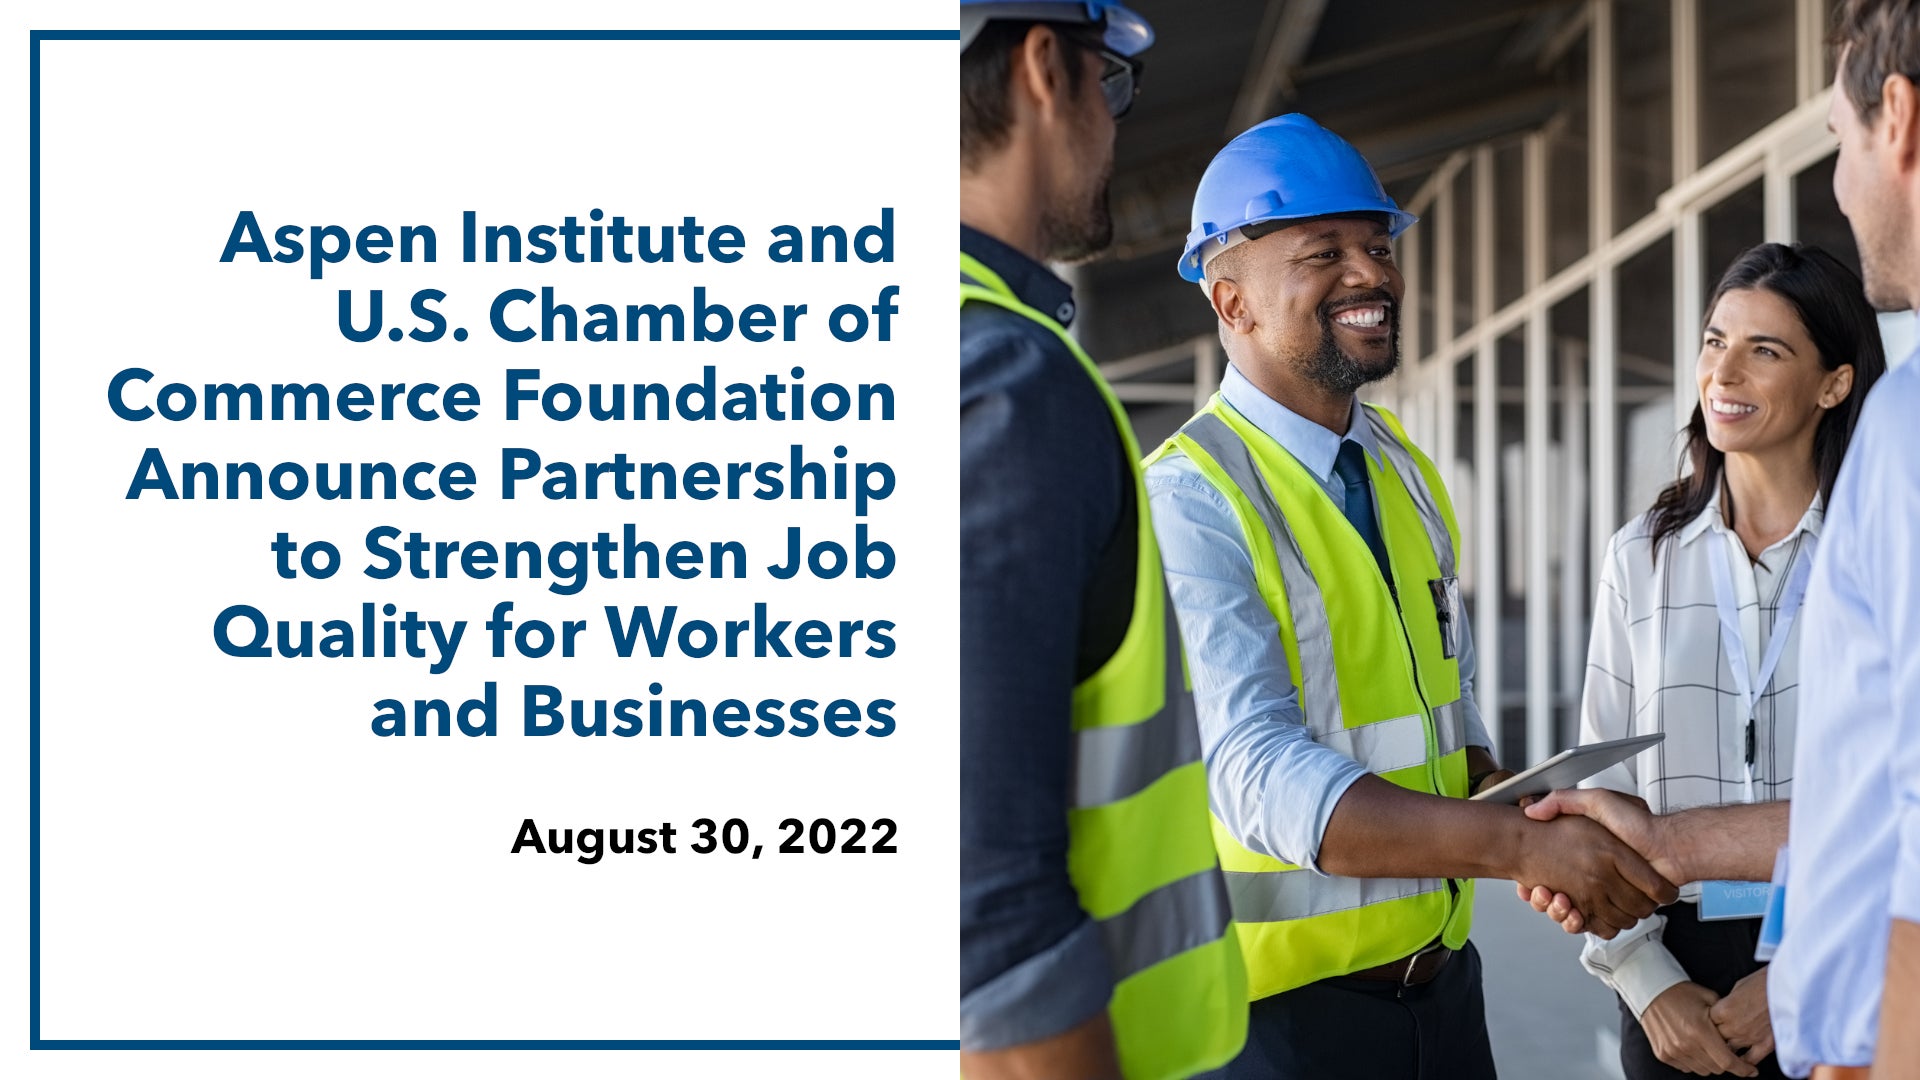 Social media image for the press release, “Aspen Institute and U.S. Chamber of Commerce Foundation Announce Partnership to Strengthen Job Quality for Workers and Businesses — August 30, 2022.” The image includes a photo of a group of construction workers — two of whom are wearing hard hats and reflector vests — smiling and shaking hands.